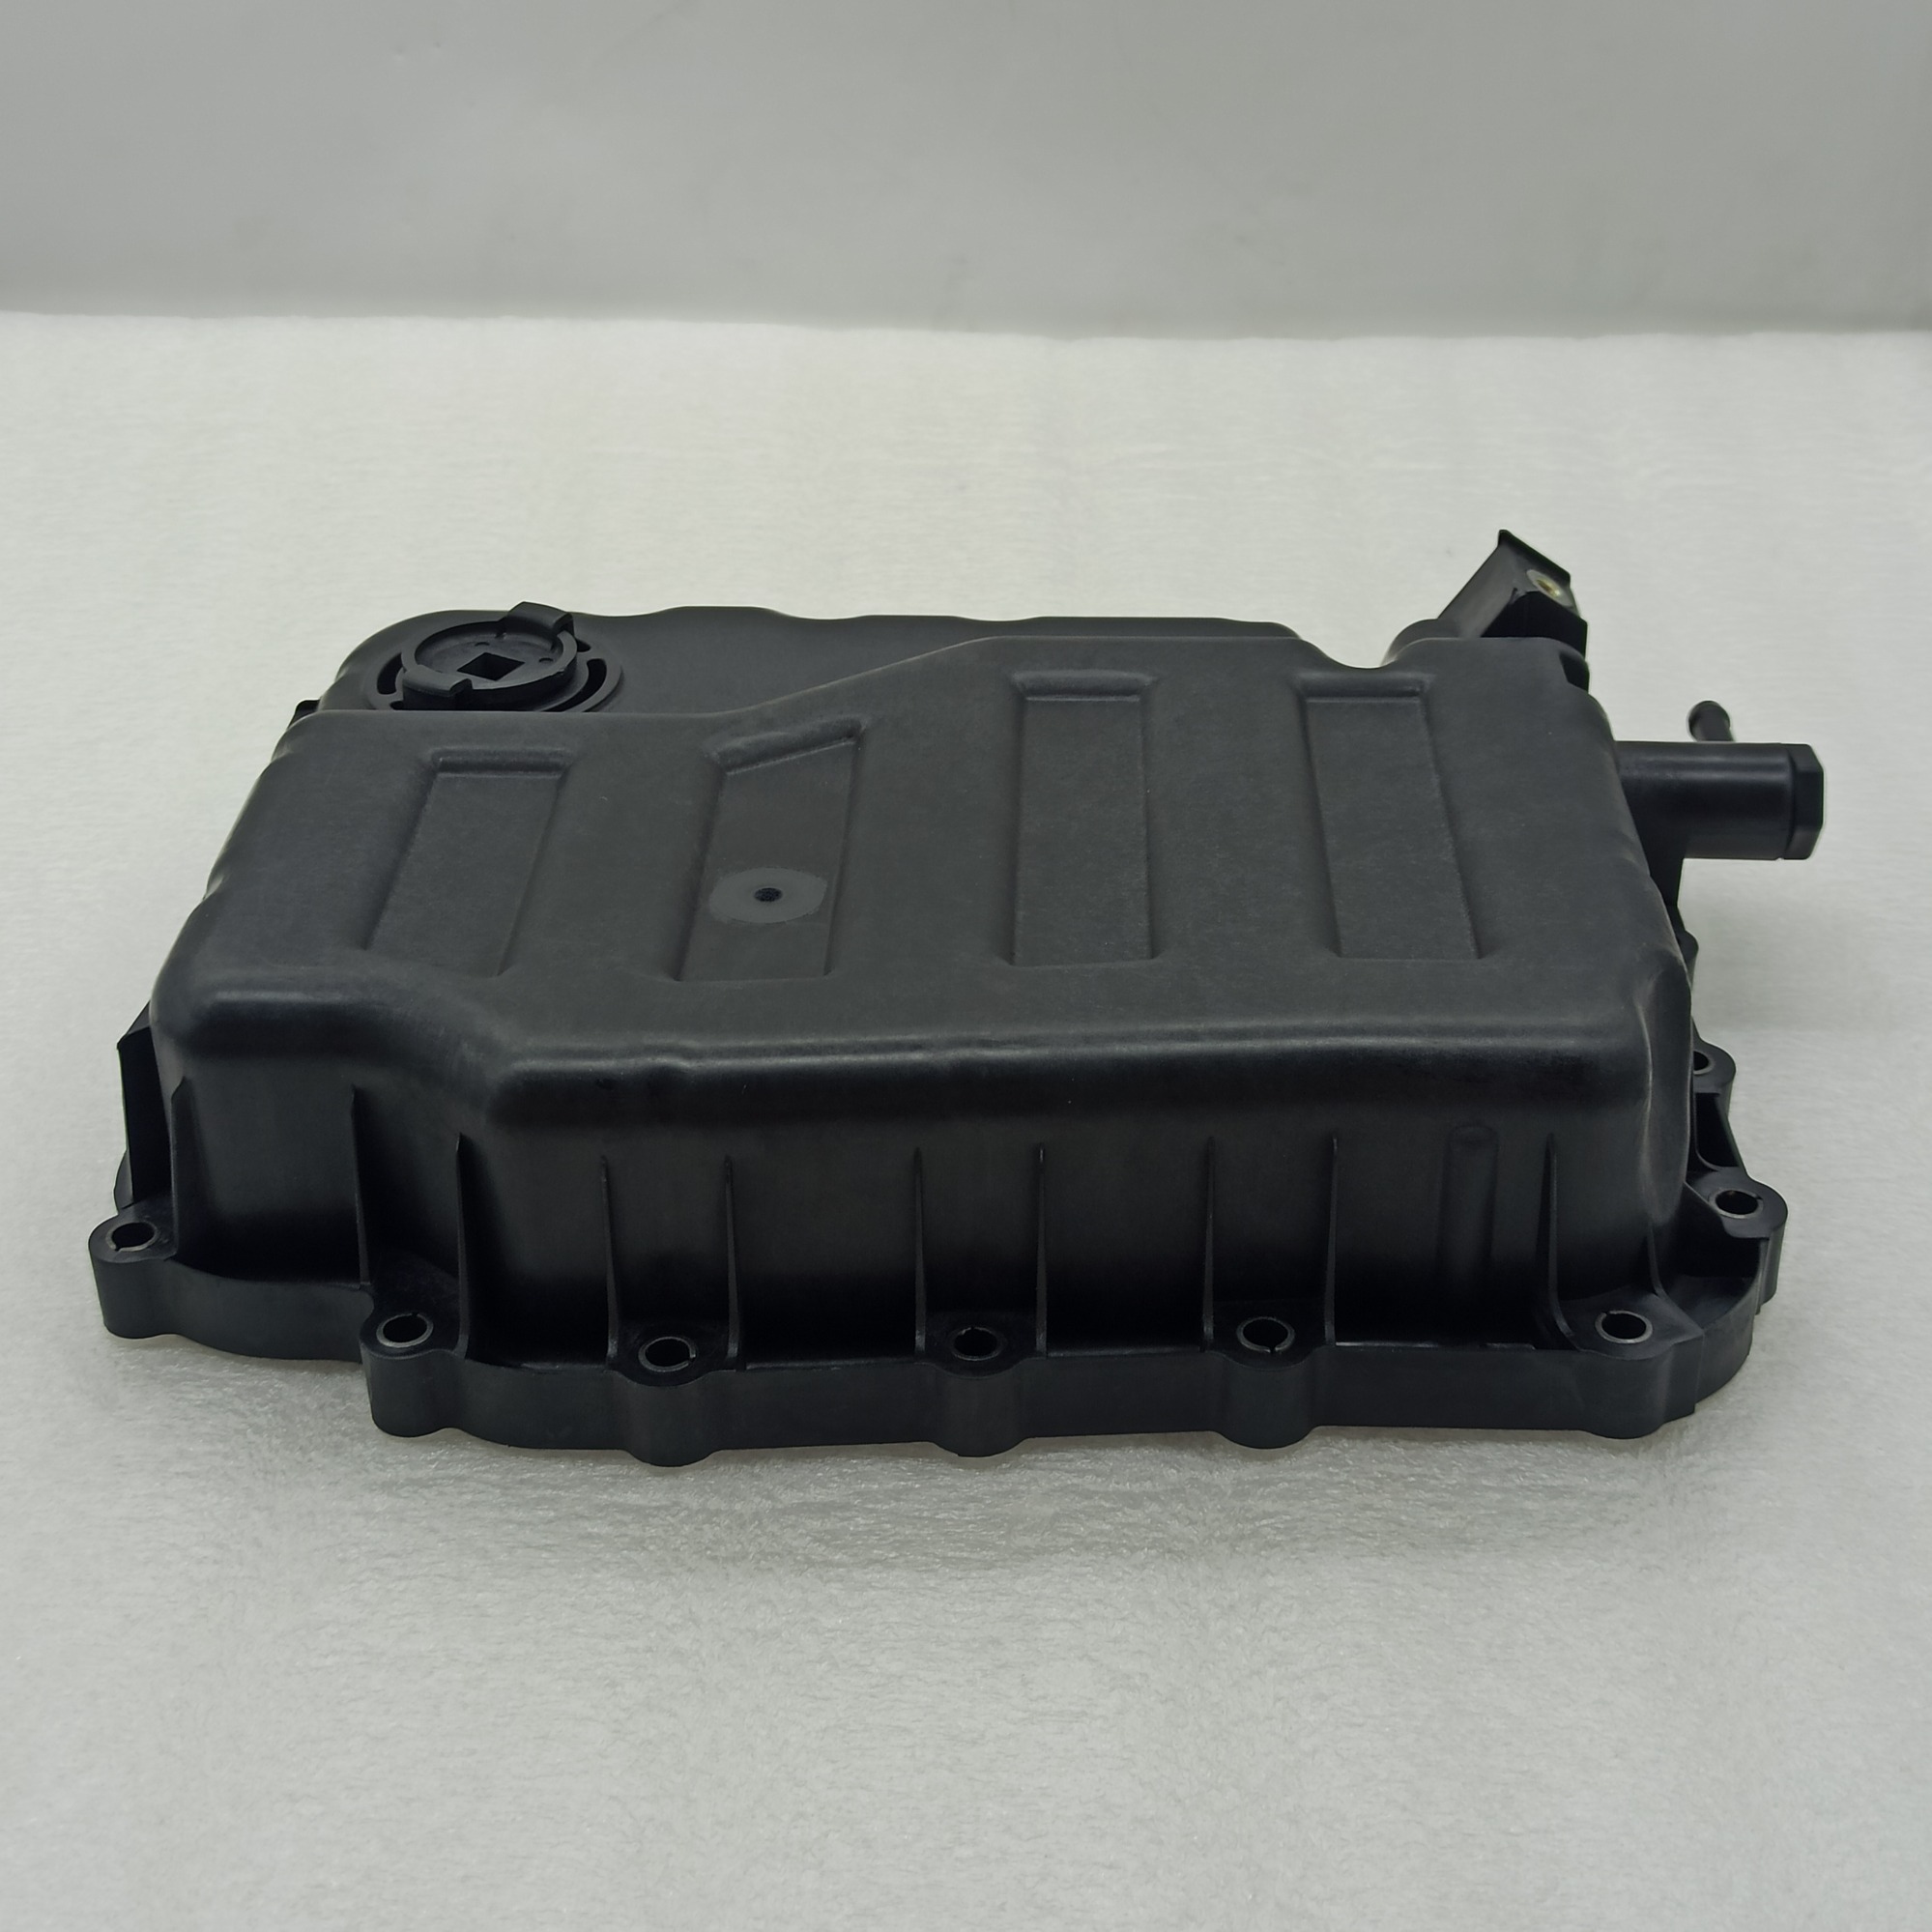 6HP24-0005-OEM 45280P 3B750 Oil pan automatic transmission parts for repair or repalce or test